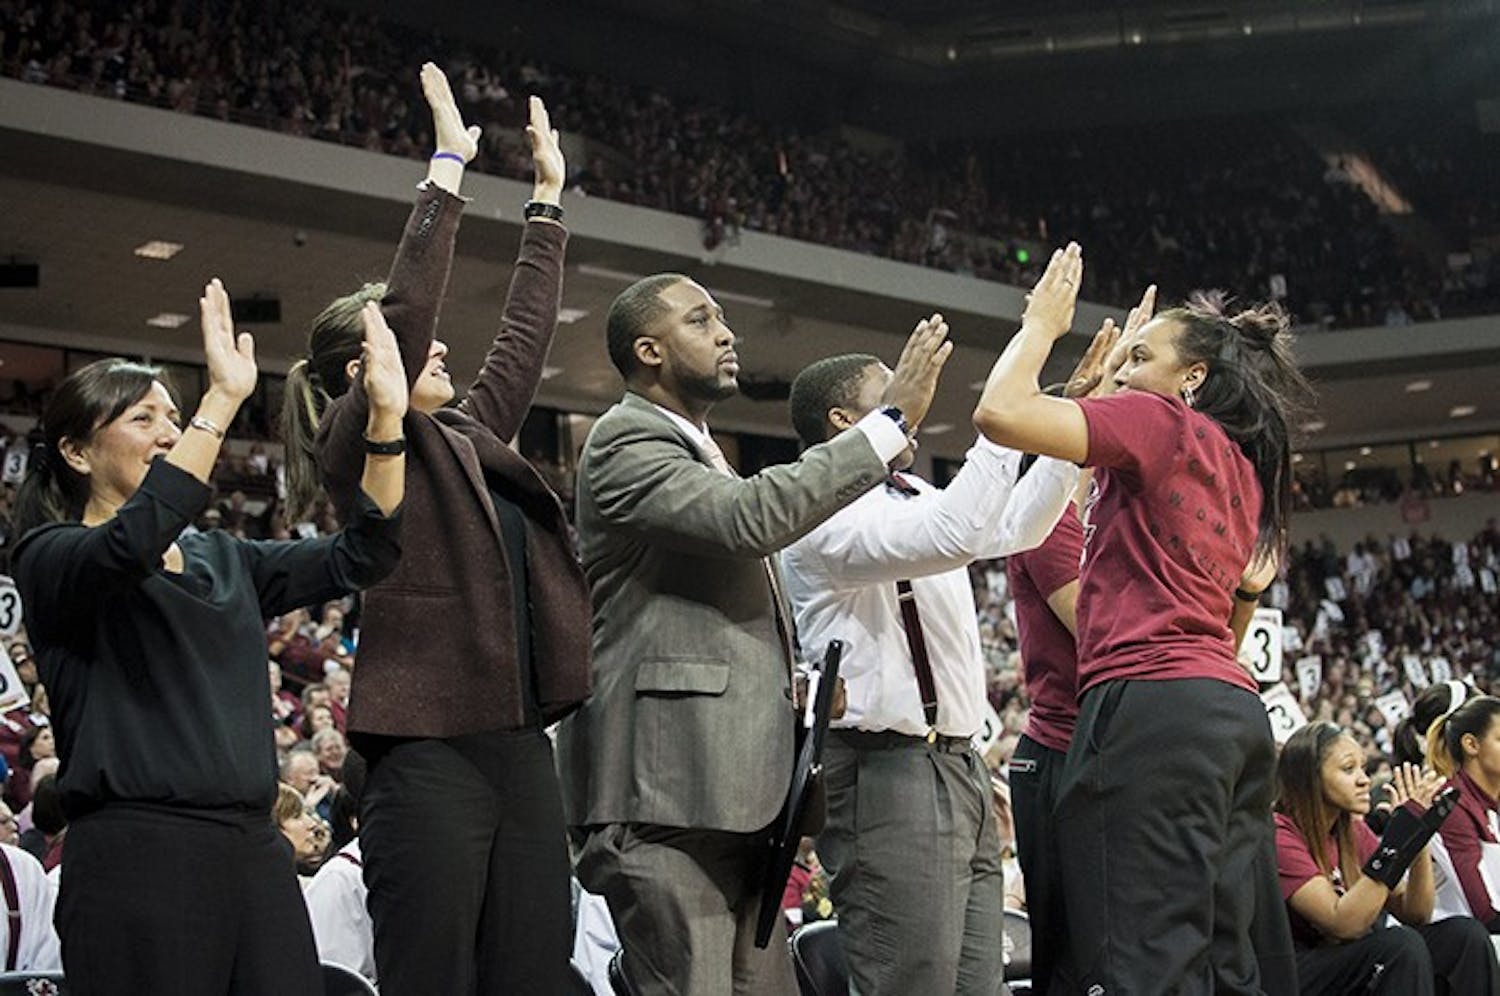 The women's basketball coaching staff celebrates after a 3 pointer is made by Tina Roy. The coaching staff help foster a family enviroment for the team on and off the court. 